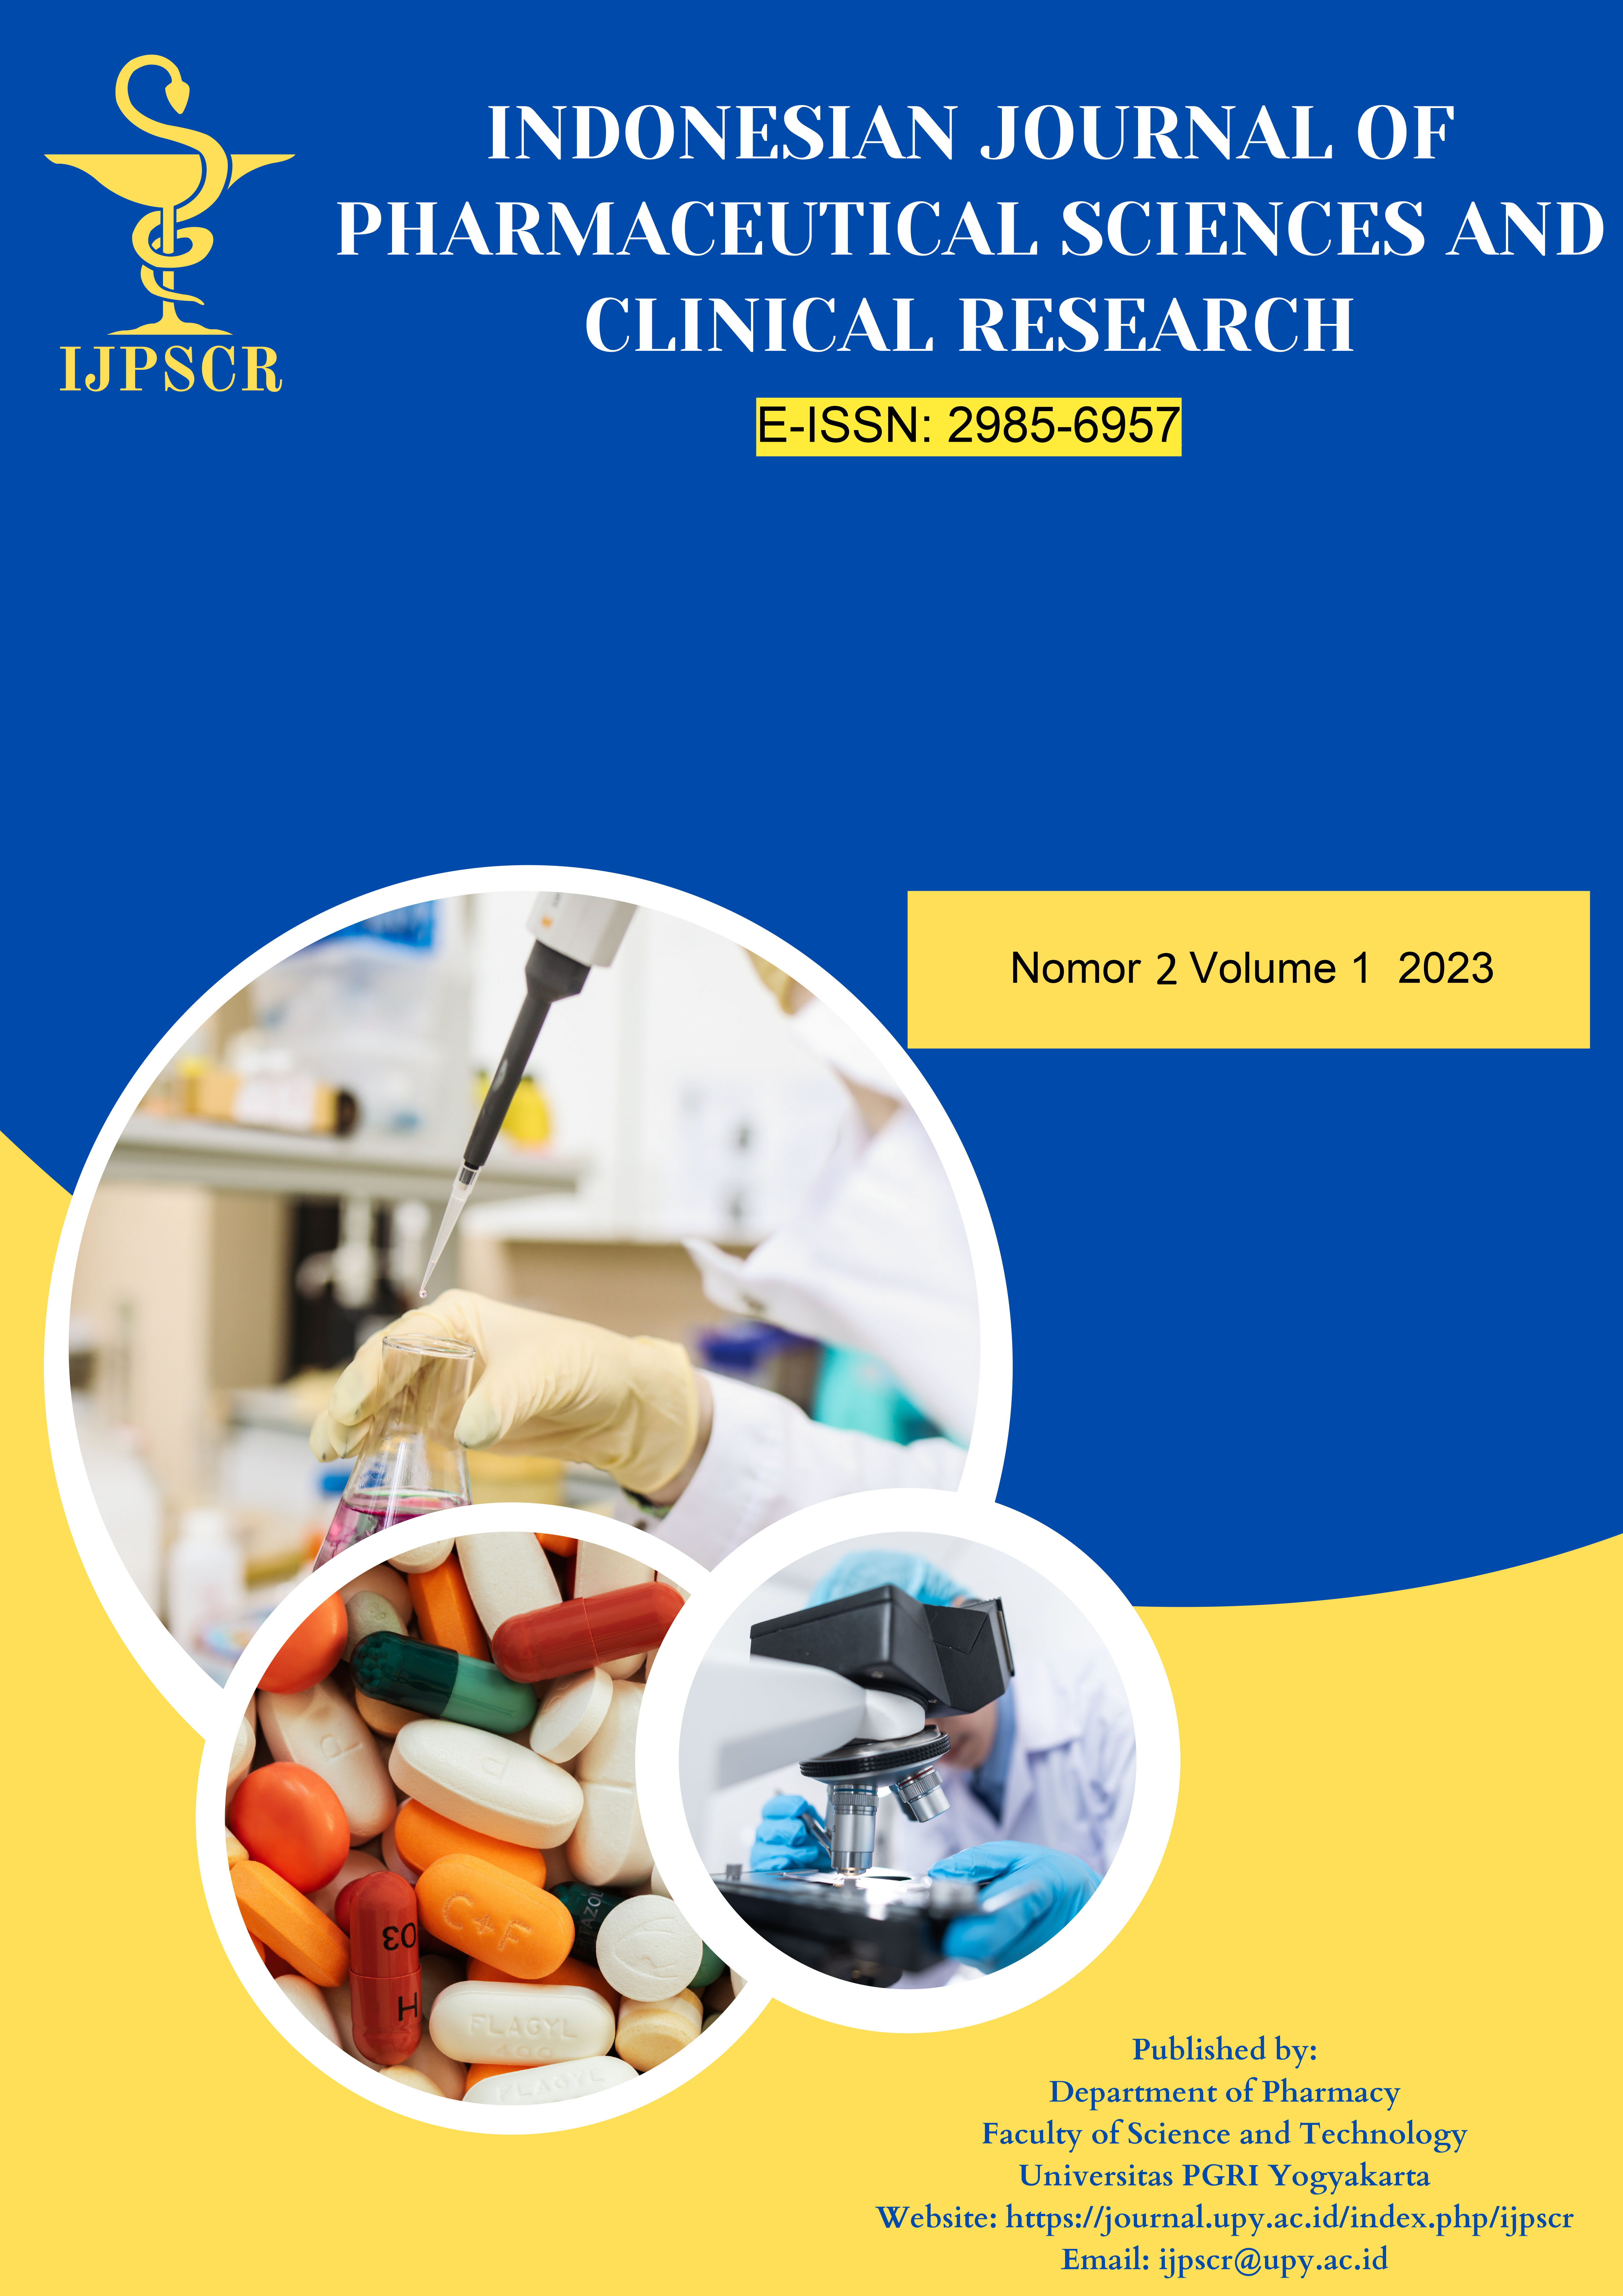 					Lihat Vol 1 No 2 (2023): Indonesian Journal of Pharmaceutical Sciences and Clinical Research
				